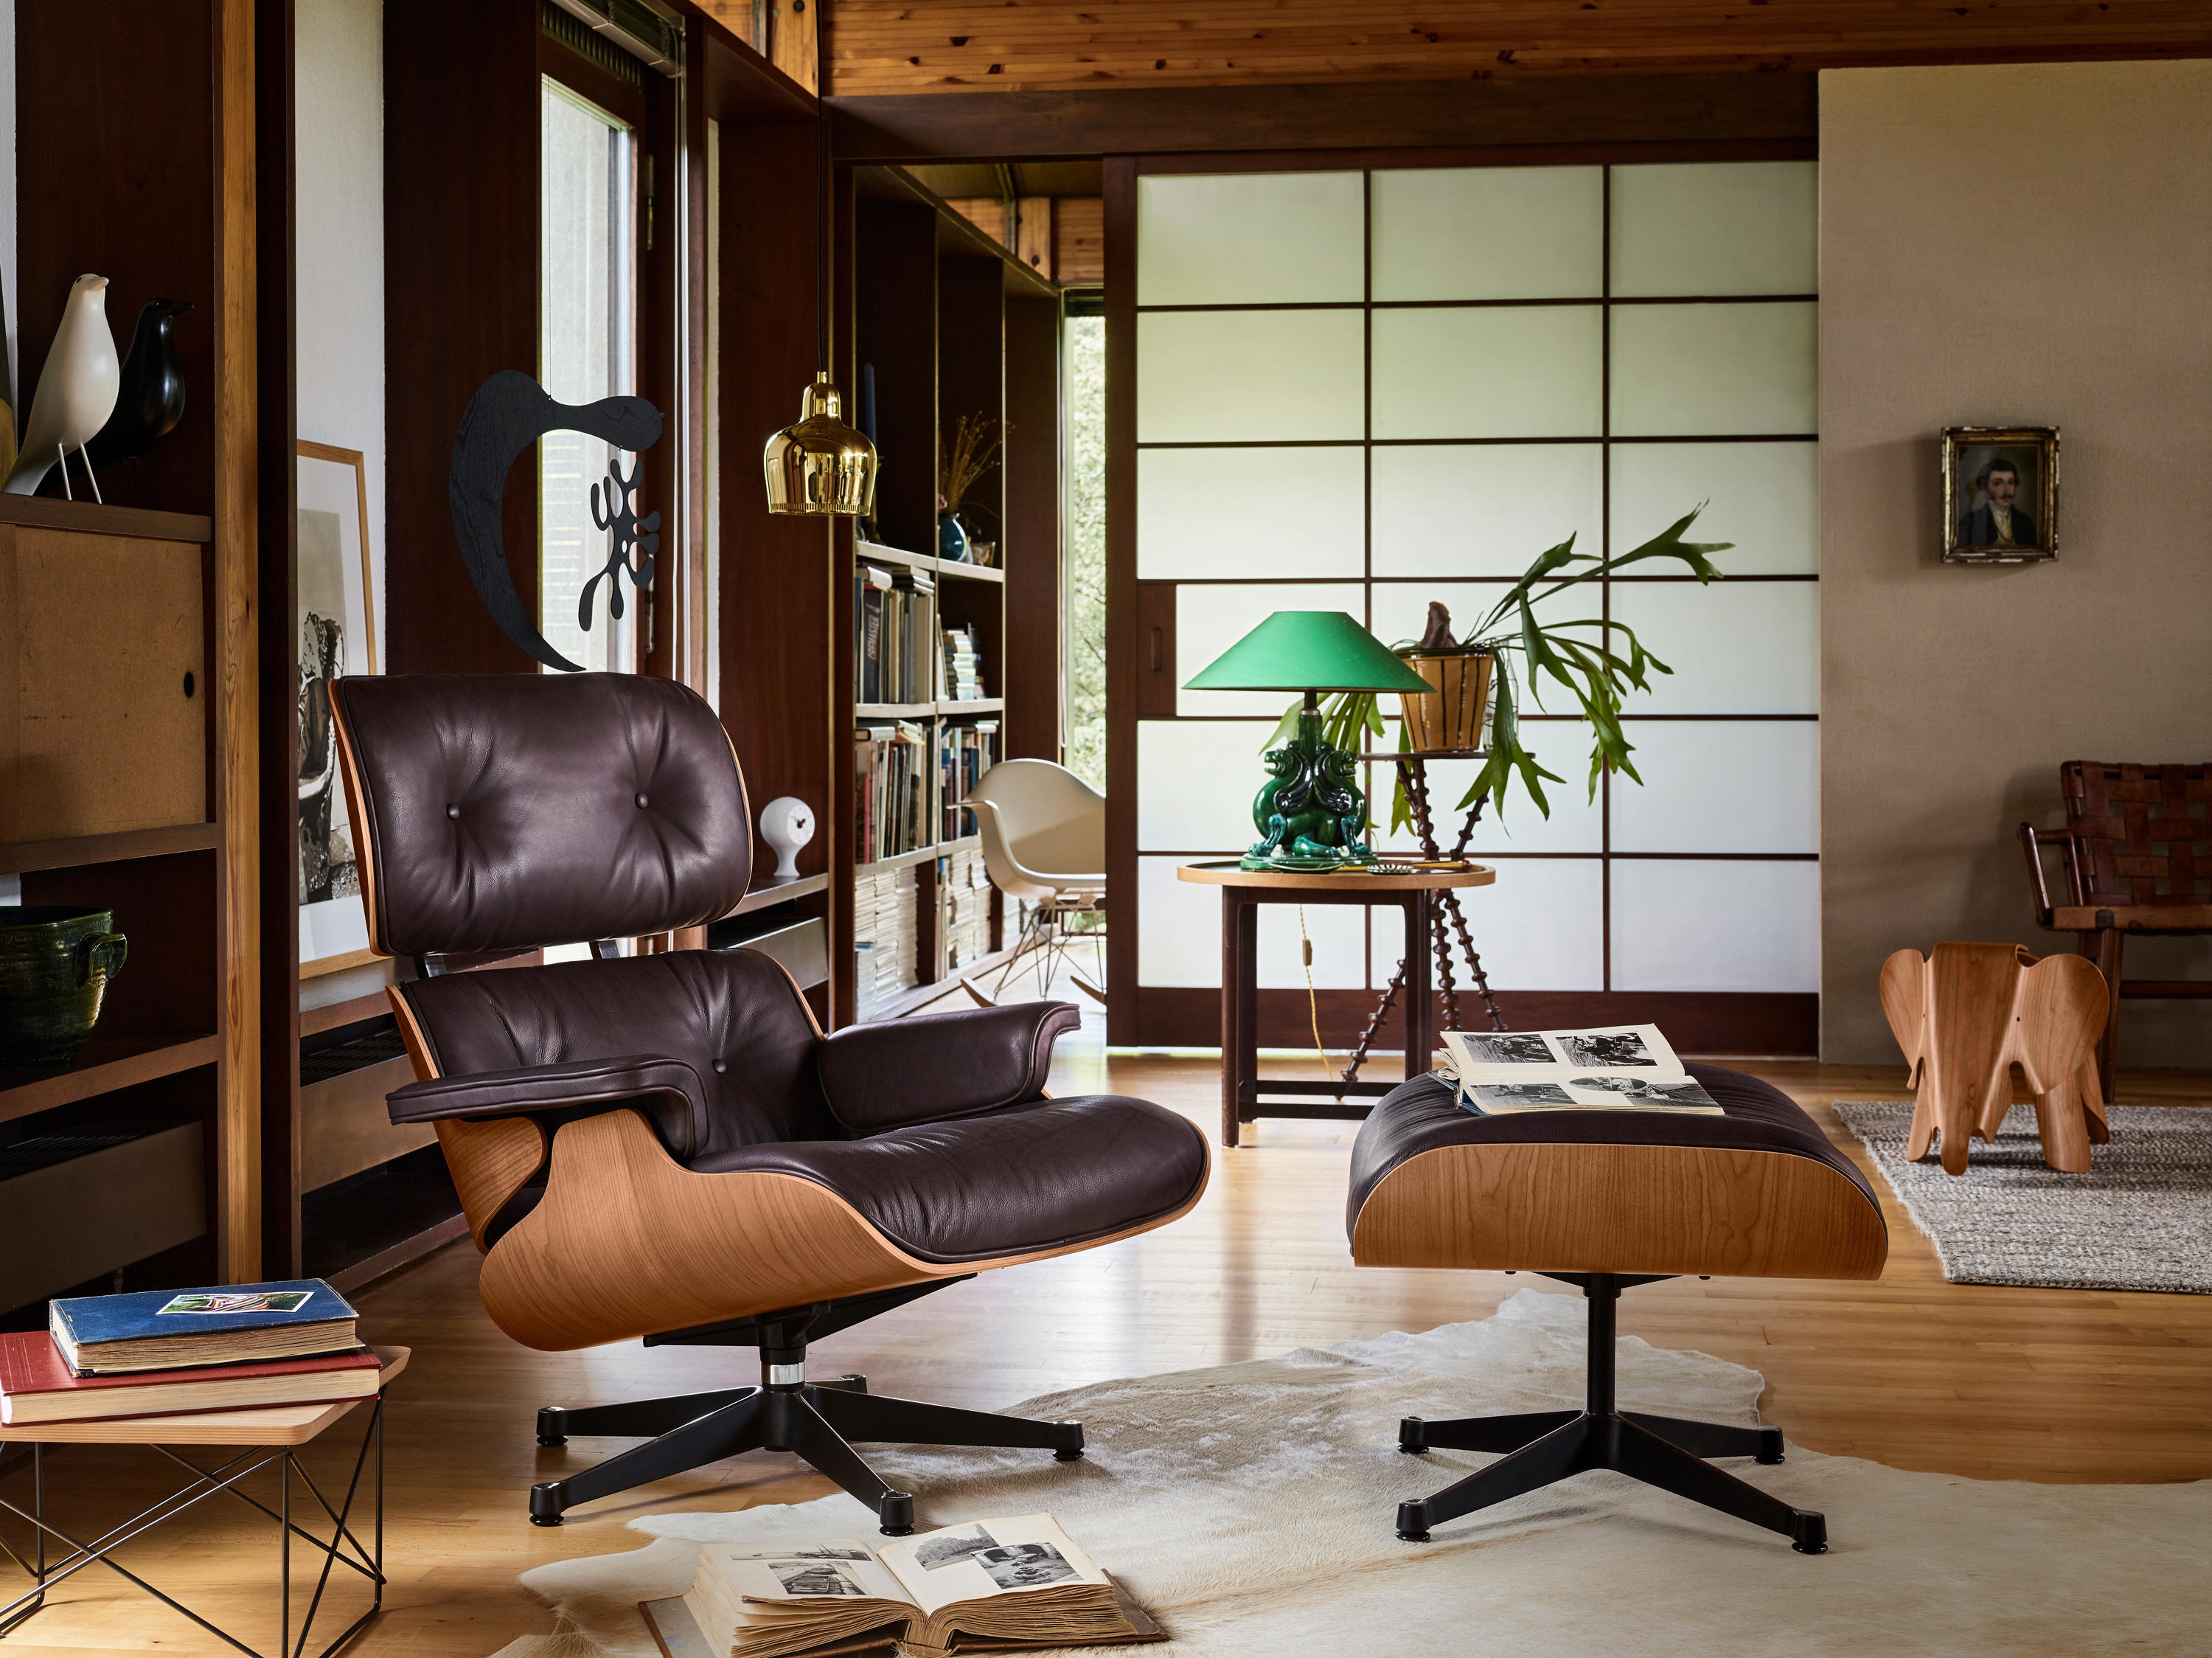 The Eames Lounge Chair: how a design classic was made